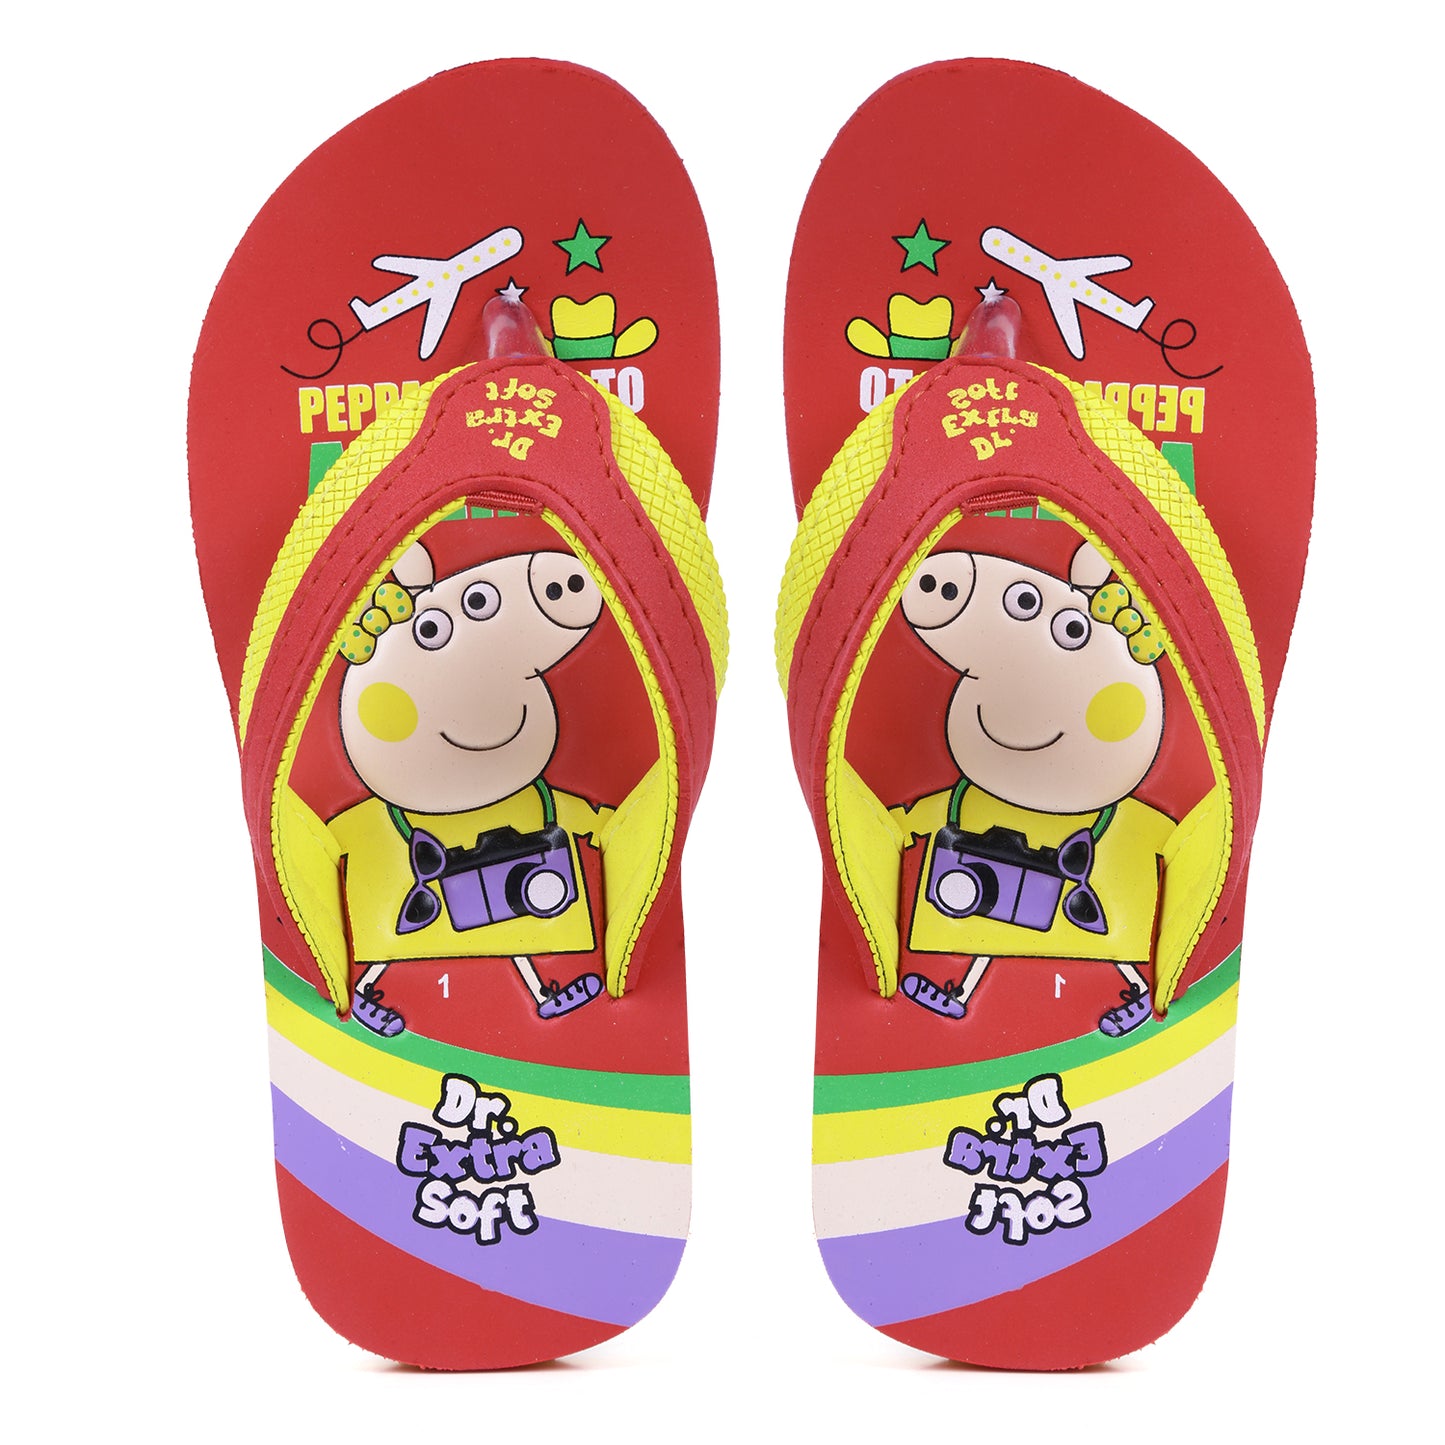 DOCTOR EXTRA SOFT Unisex-Child Kids Flip-Flop (Peppa Print) Soft Comfortable Indoor & Outdoor Slippers Stylish Non-Slip Slide Home Casual Cool Cartoon Cute House Chappals For Boys & Girls